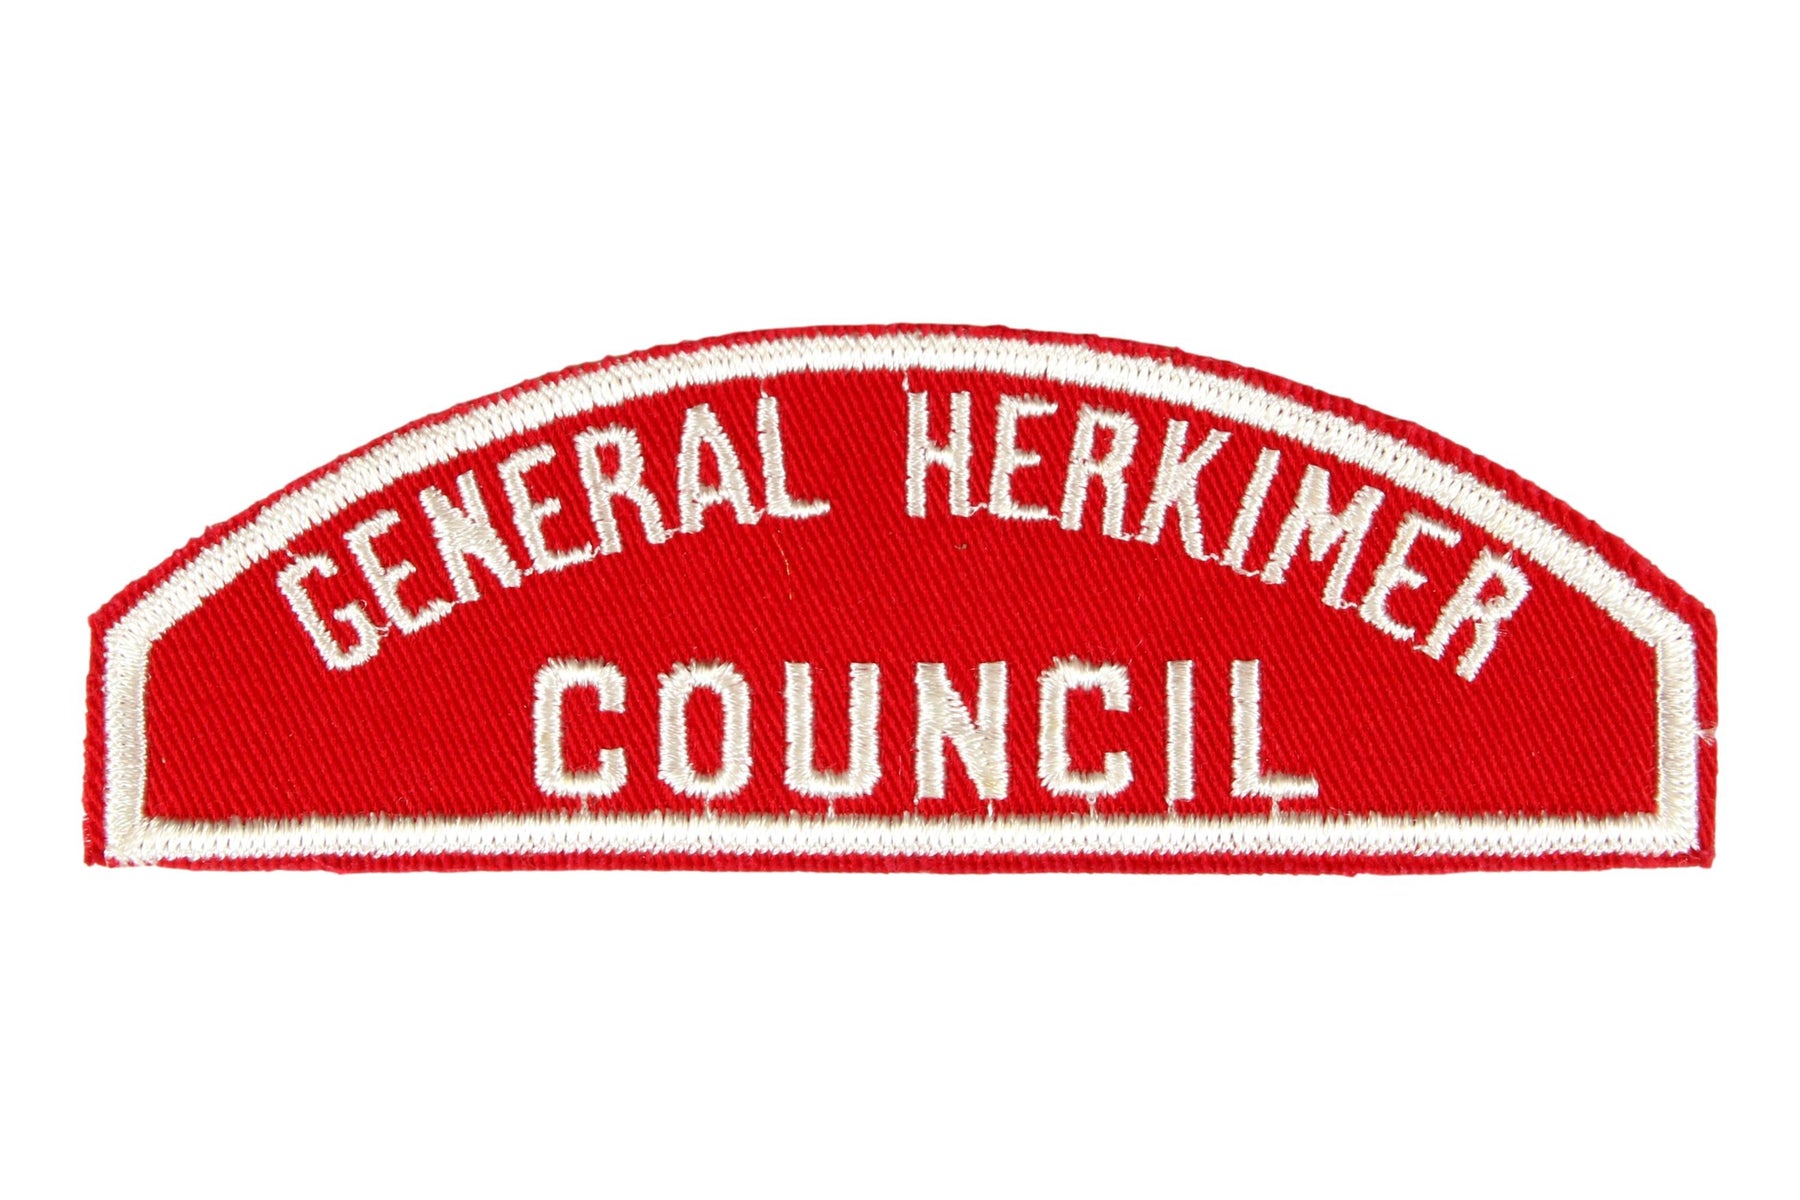 General Herkimer Council Red and White Council Strip